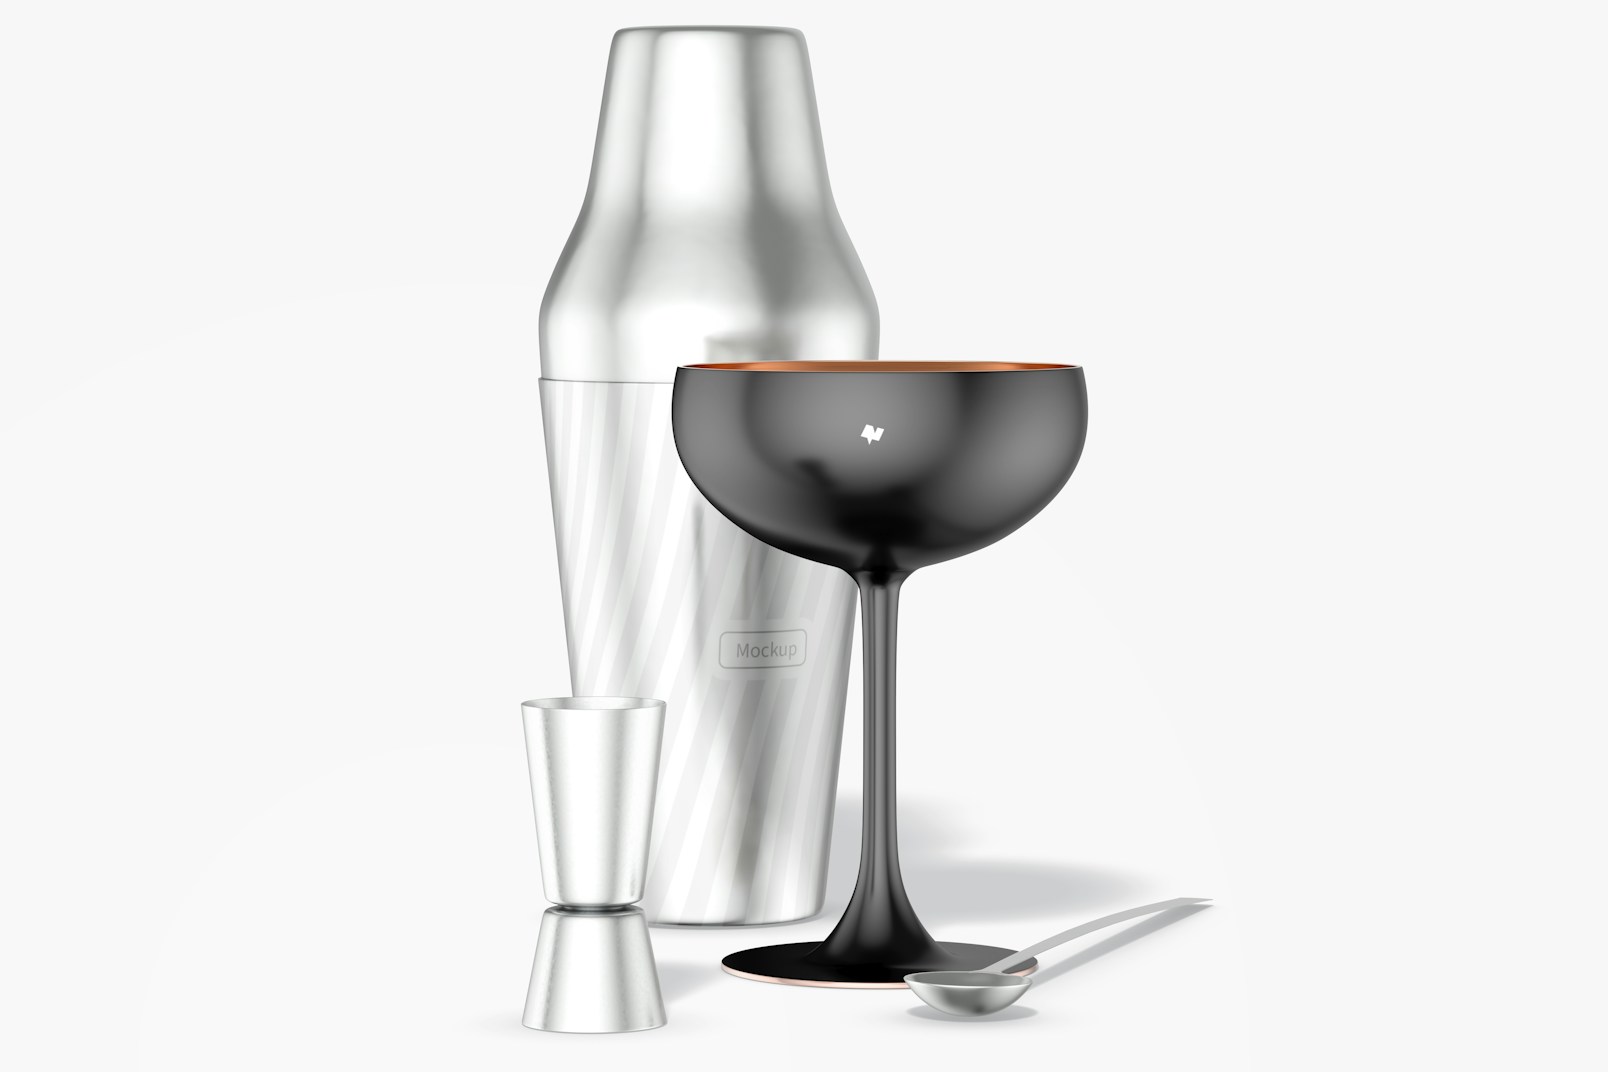 Metal Coupe Cocktail Glass Mockup, with Shaker